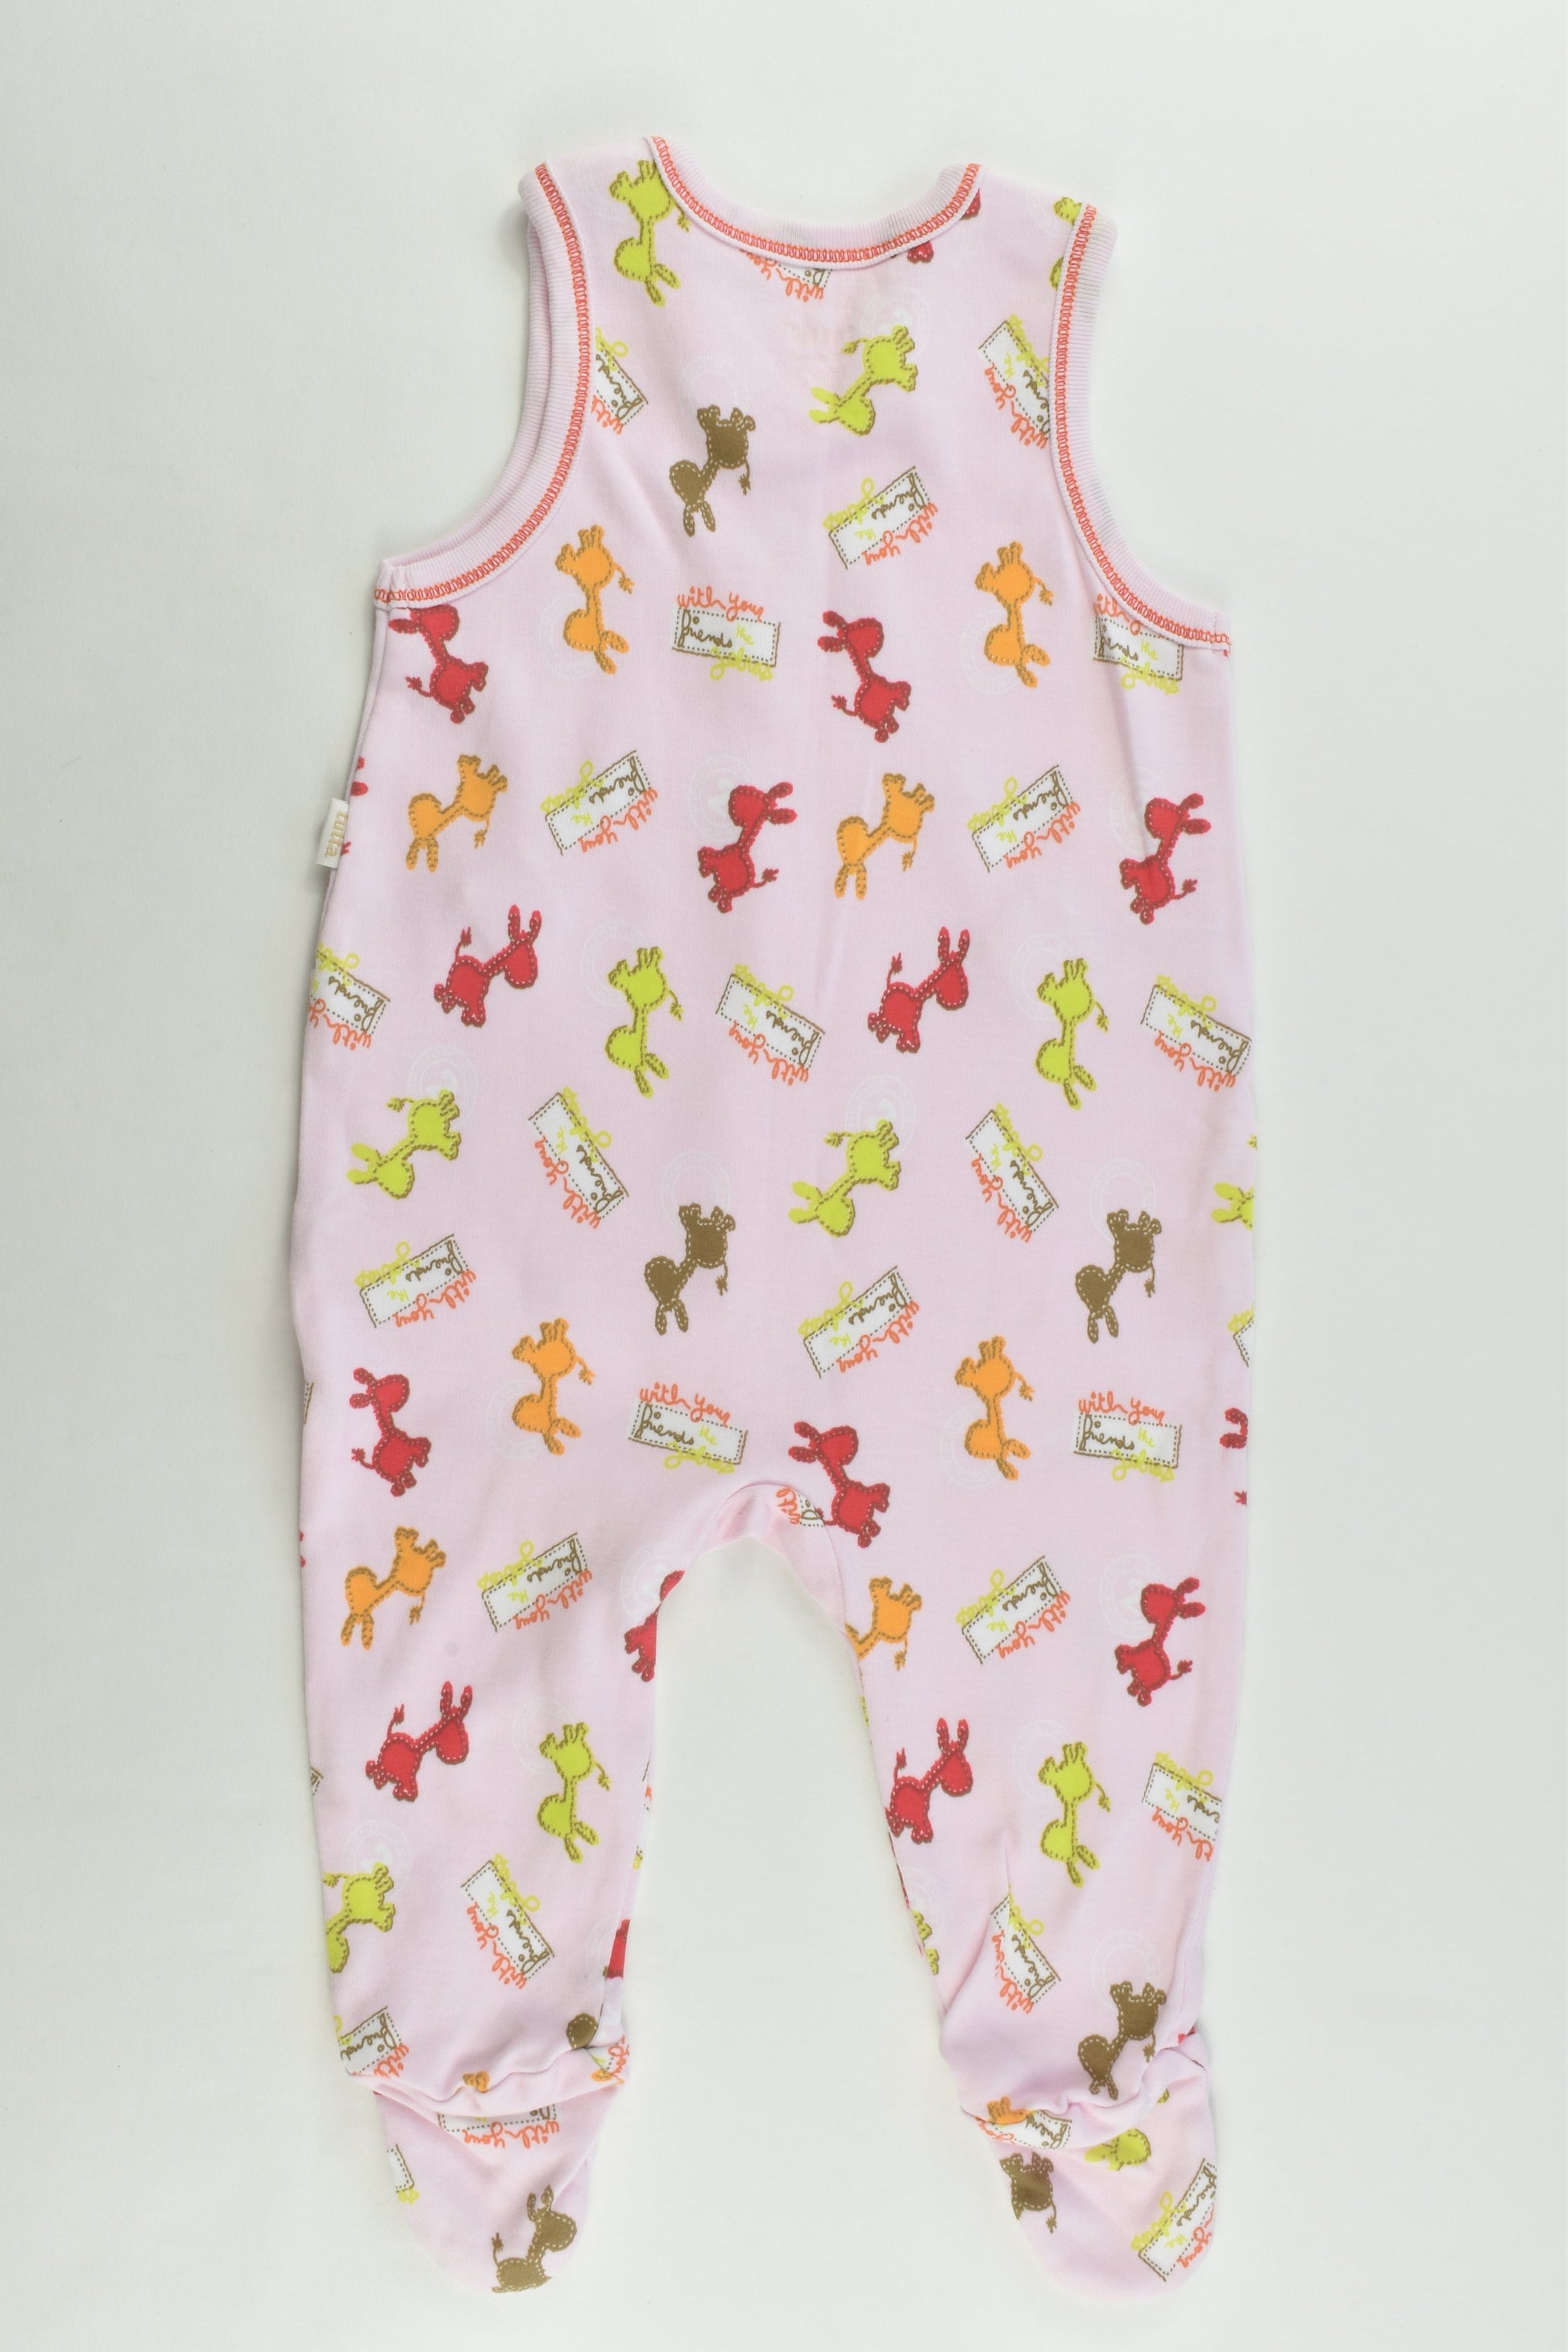 NEW Tutta (Finland) Size 62 cm (00) Footed ""With Your Friend The Giraffe" Overalls